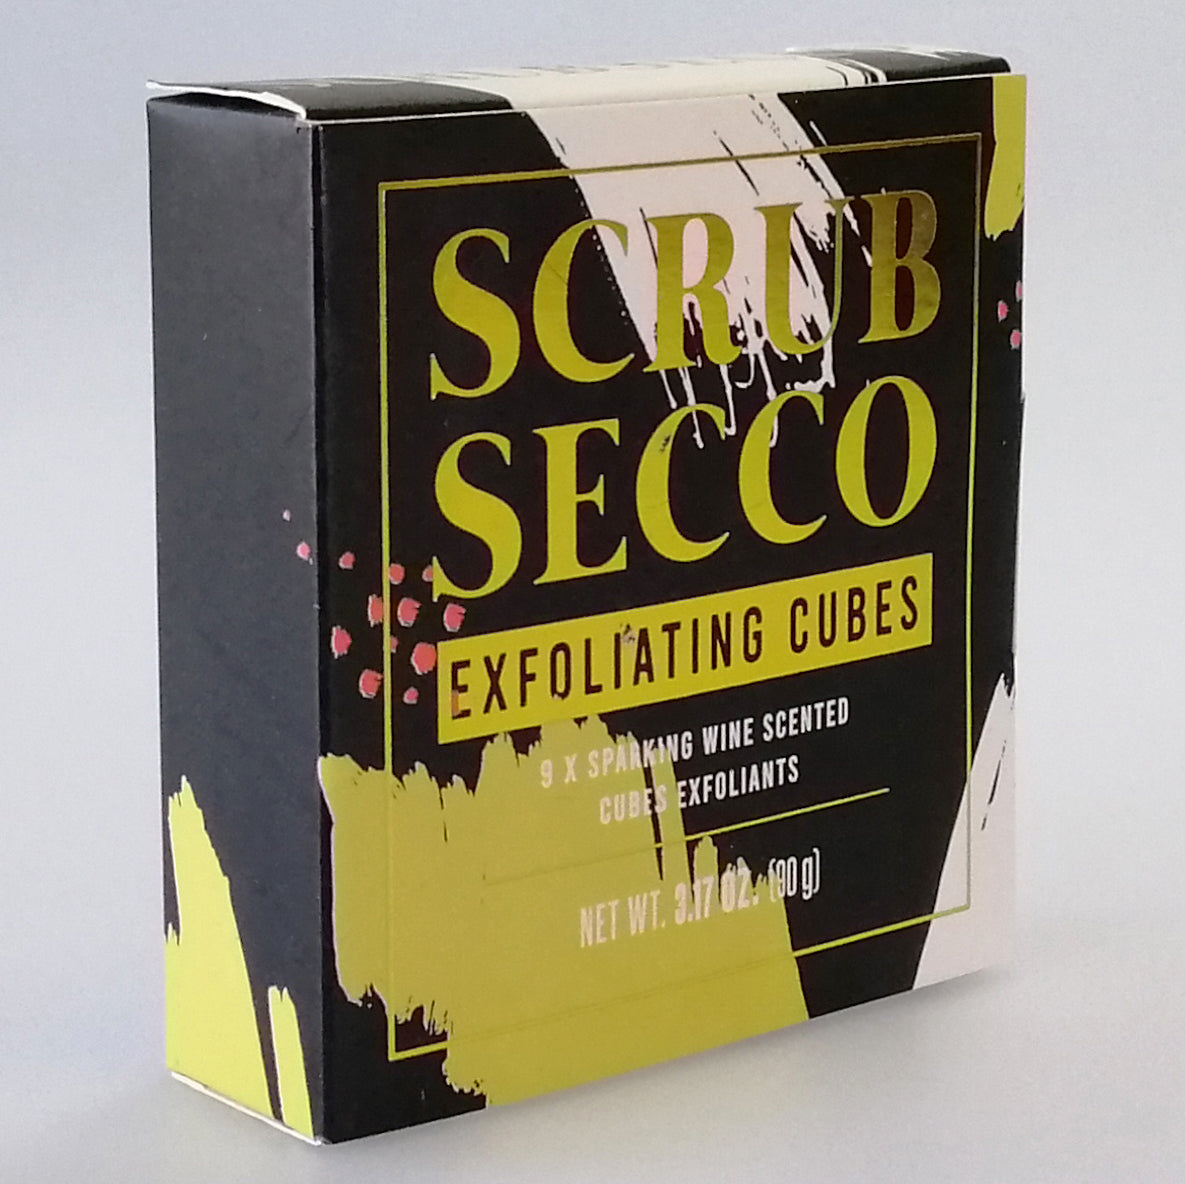 Scrubsecco' Sparkling Wine Scented Exfoliating Cubes - Pack of 9